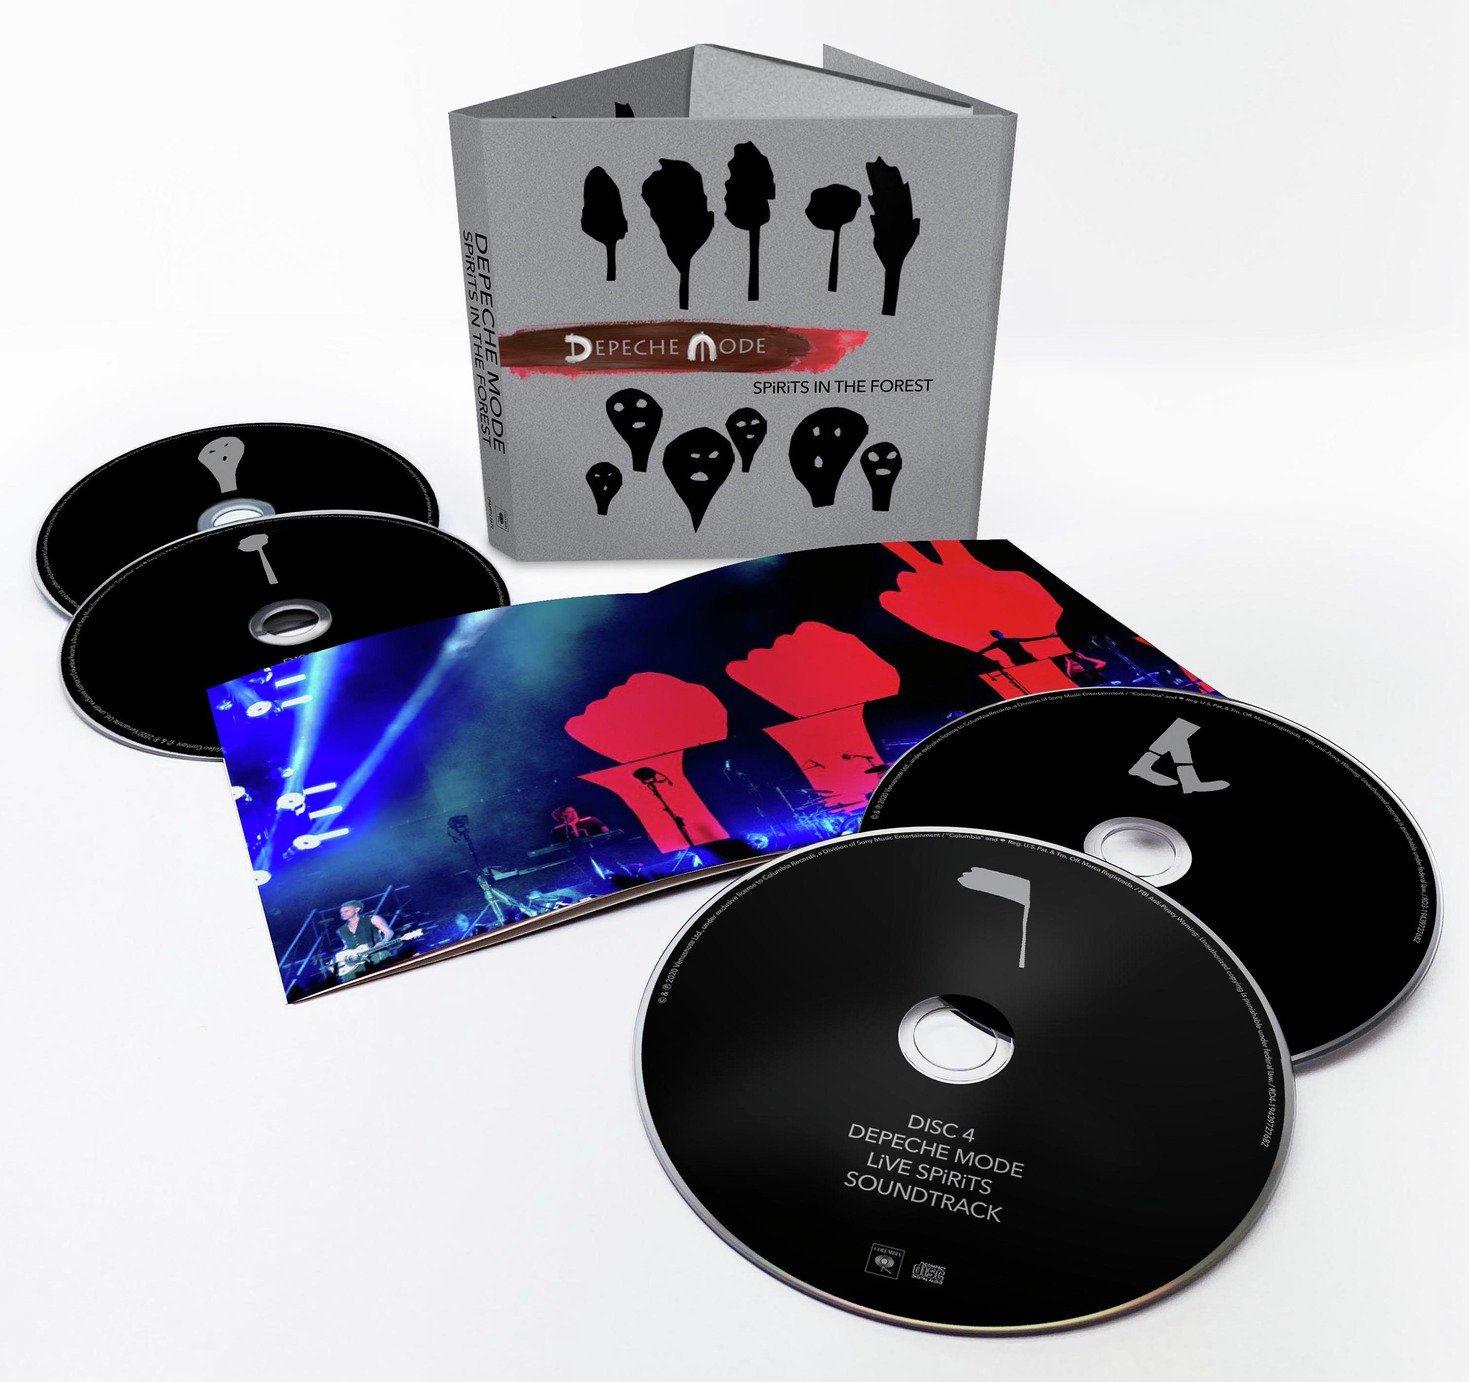 Depeche Mode SPiRiTS in the Forest CD & Blu-ray Review